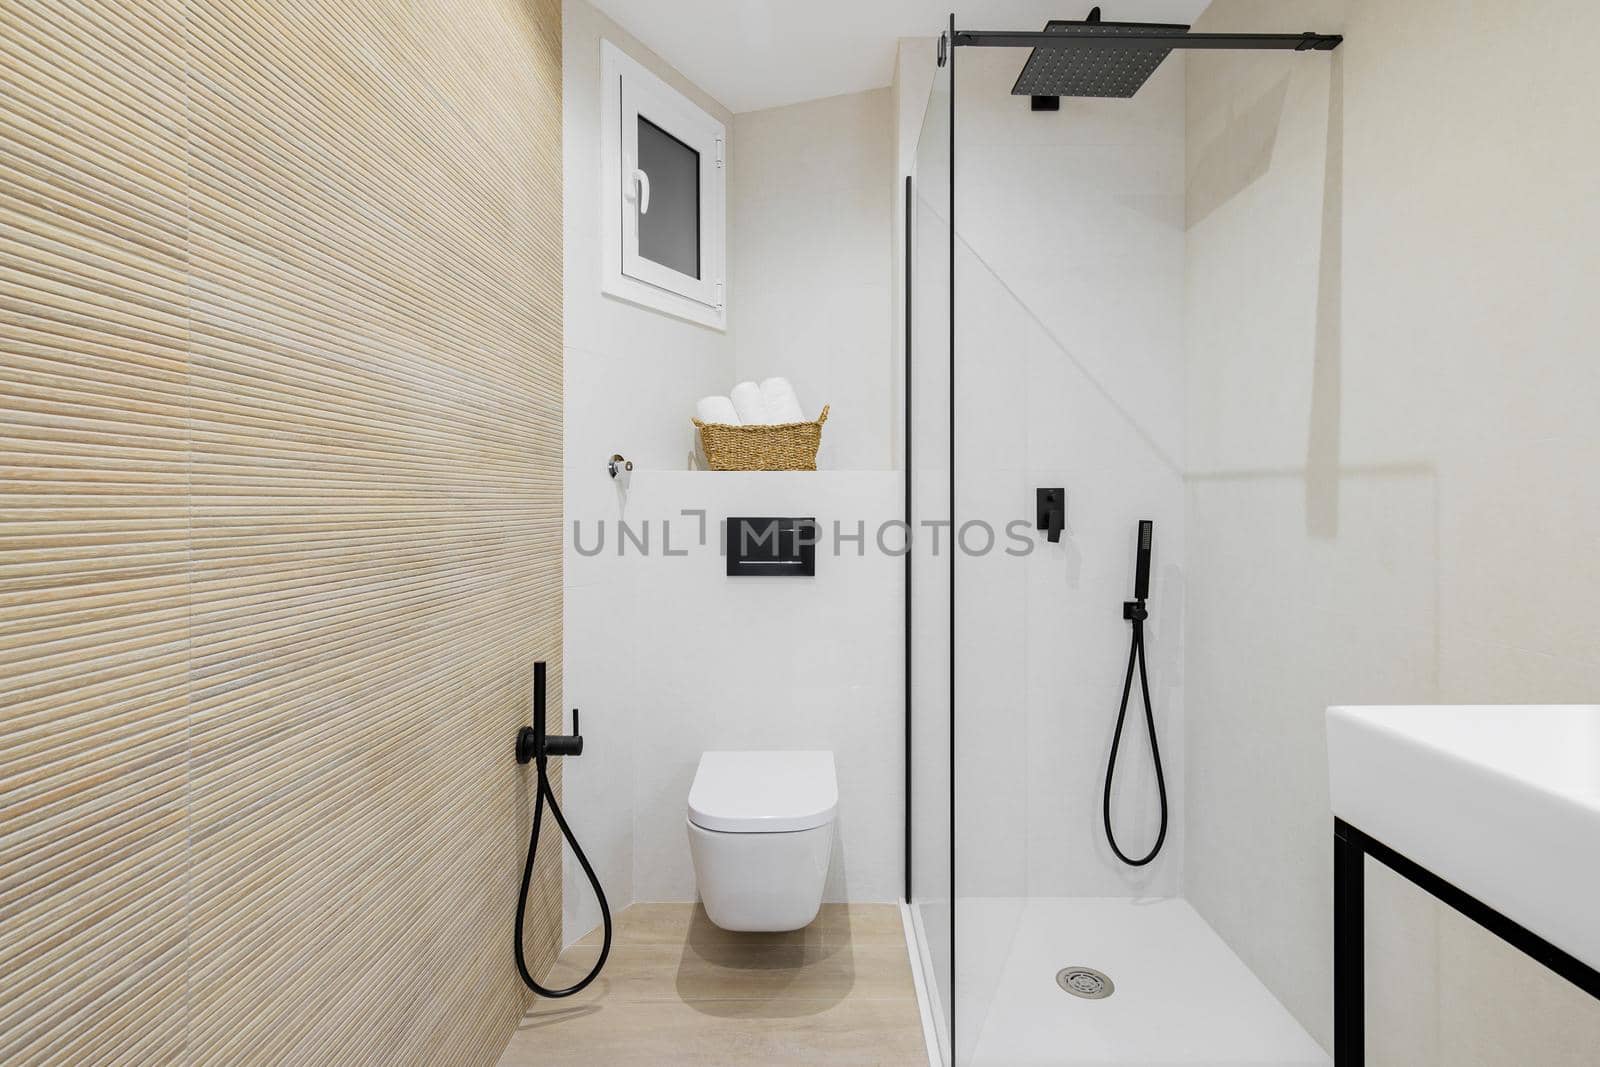 Interior of modern style bathroom in white and beige colors in refurbished apartment. Shower zone and toilet, with black faucets, towels and tiled floor and walls. by apavlin